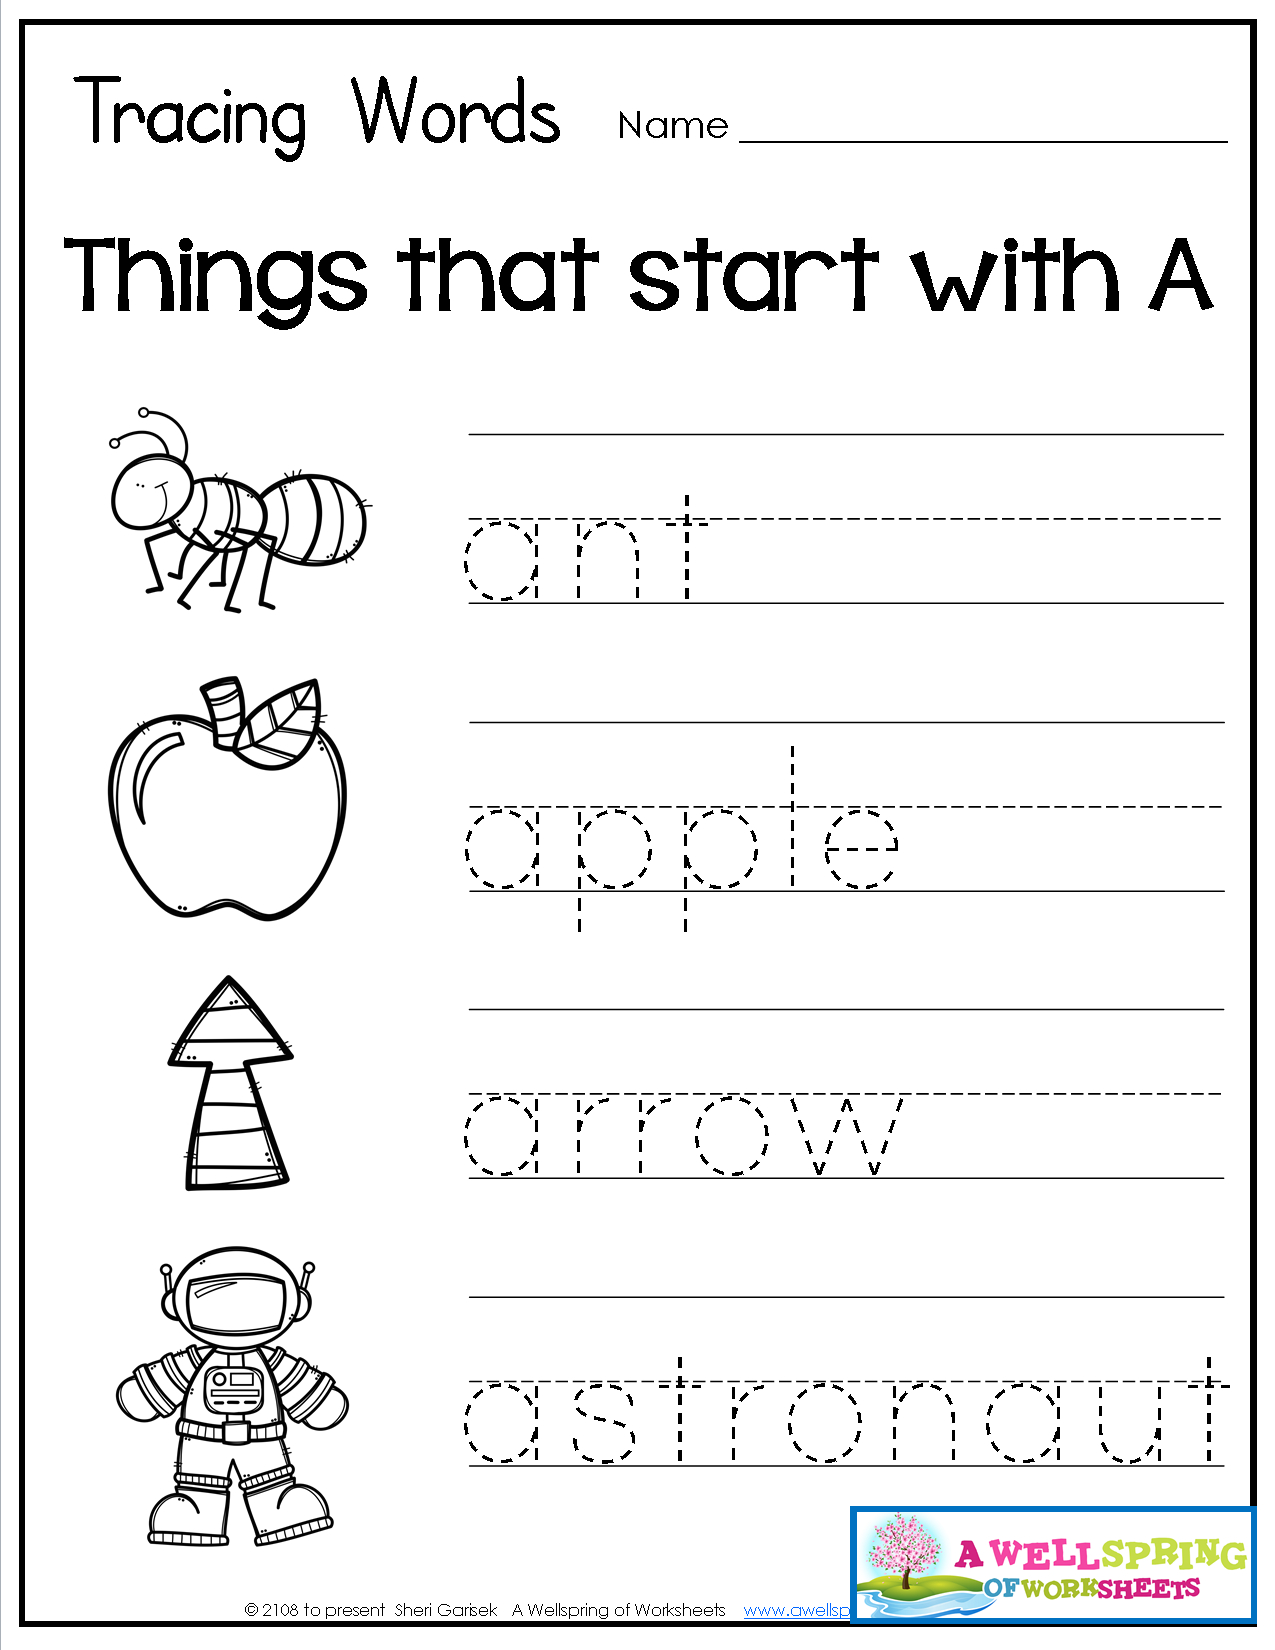 Tracing Words - Things That Start With A-Z | Teaching intended for Tracing Letters And Words